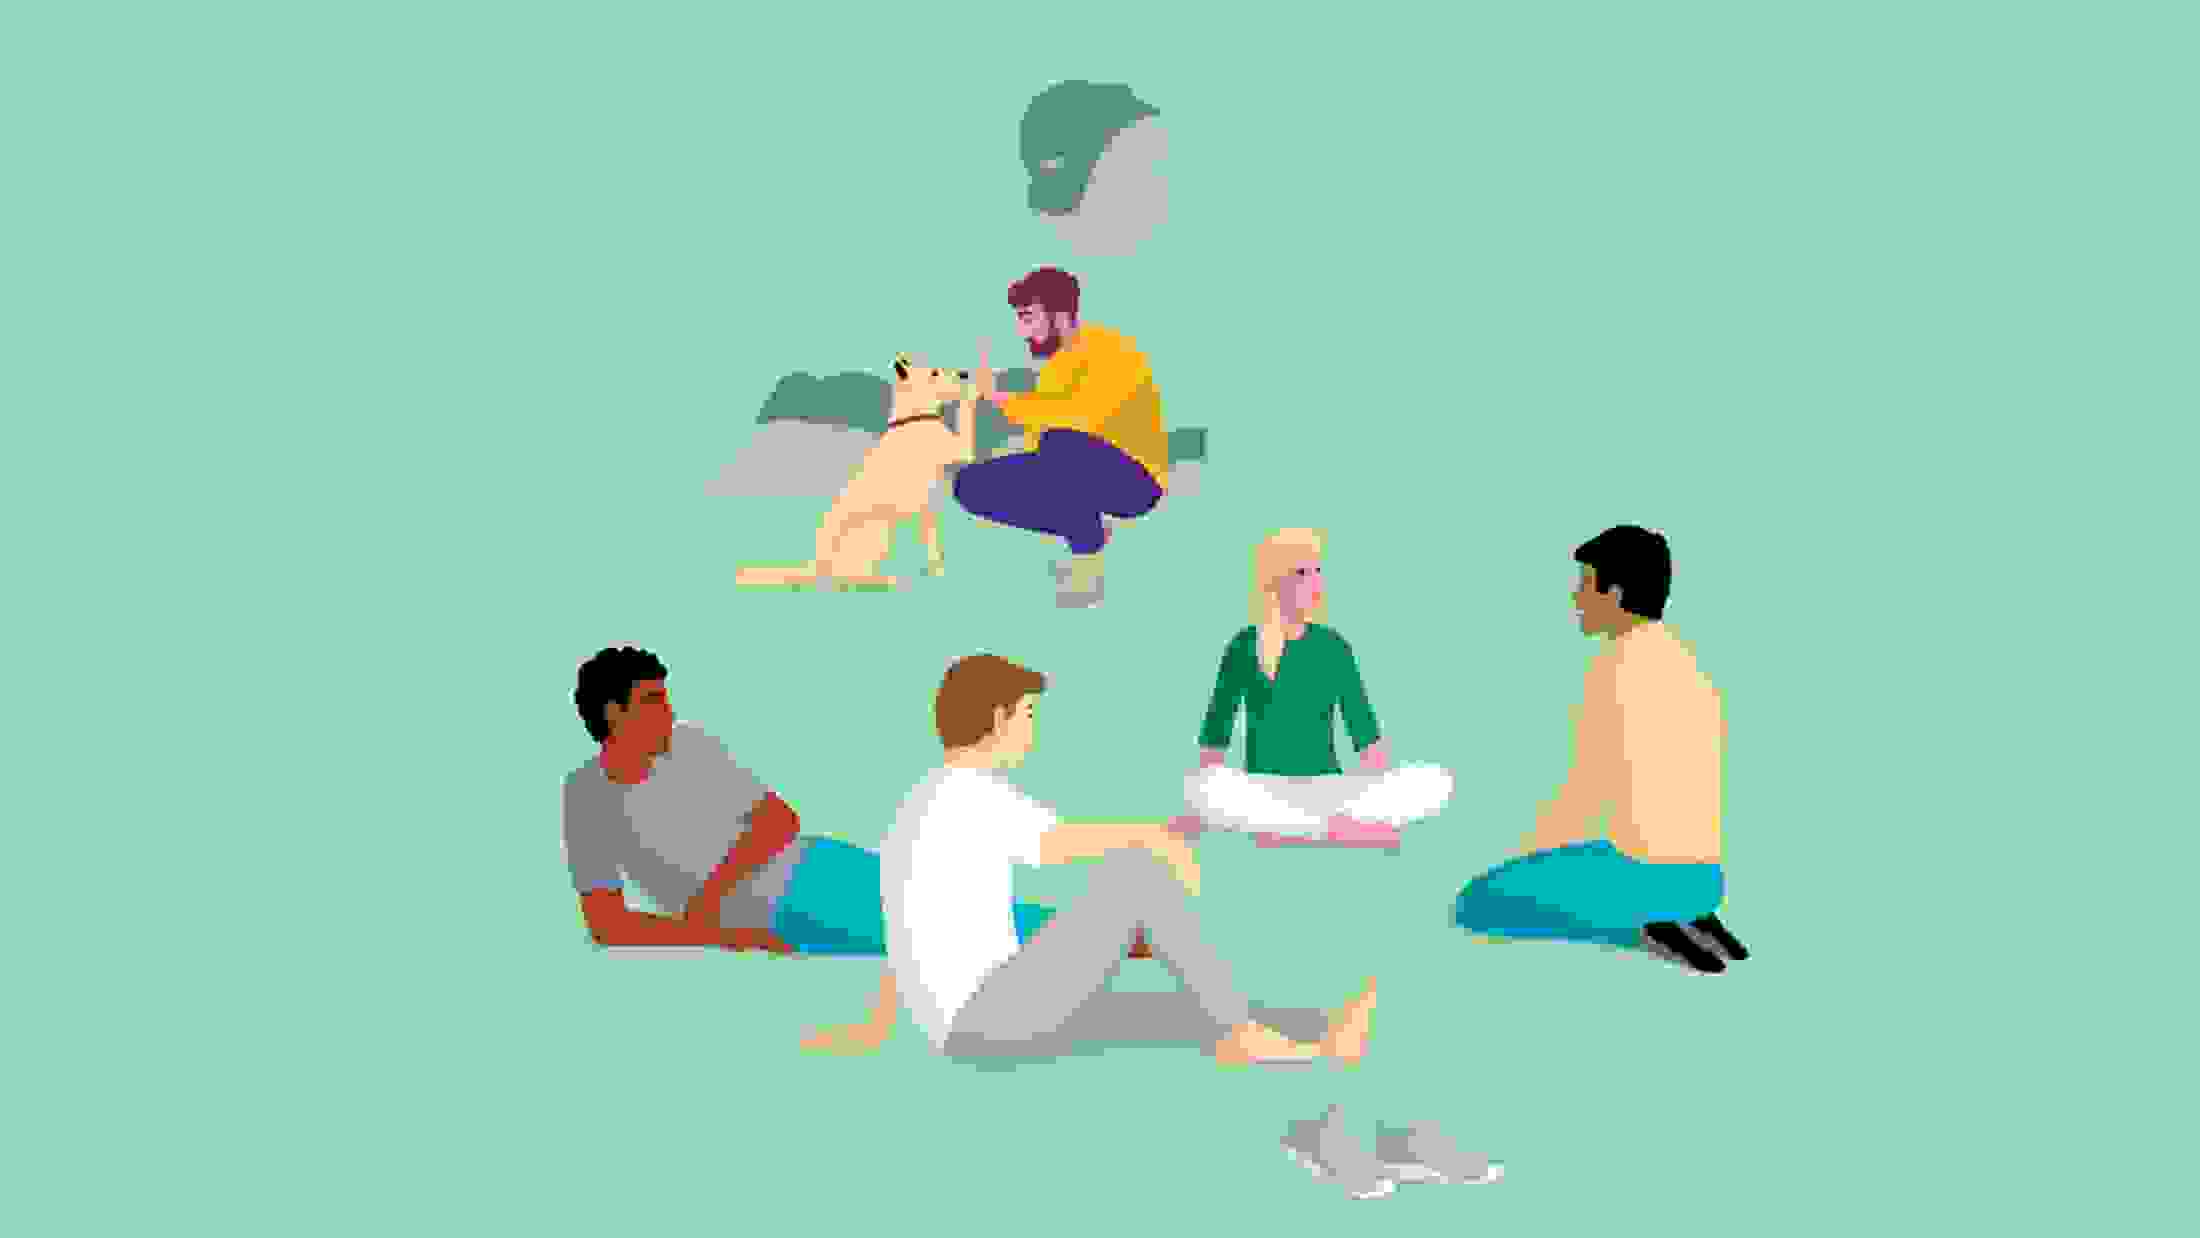 Illustration of a person feeding his dog with a sad expression in front of a group of 4 people who are socializing on the grass. 